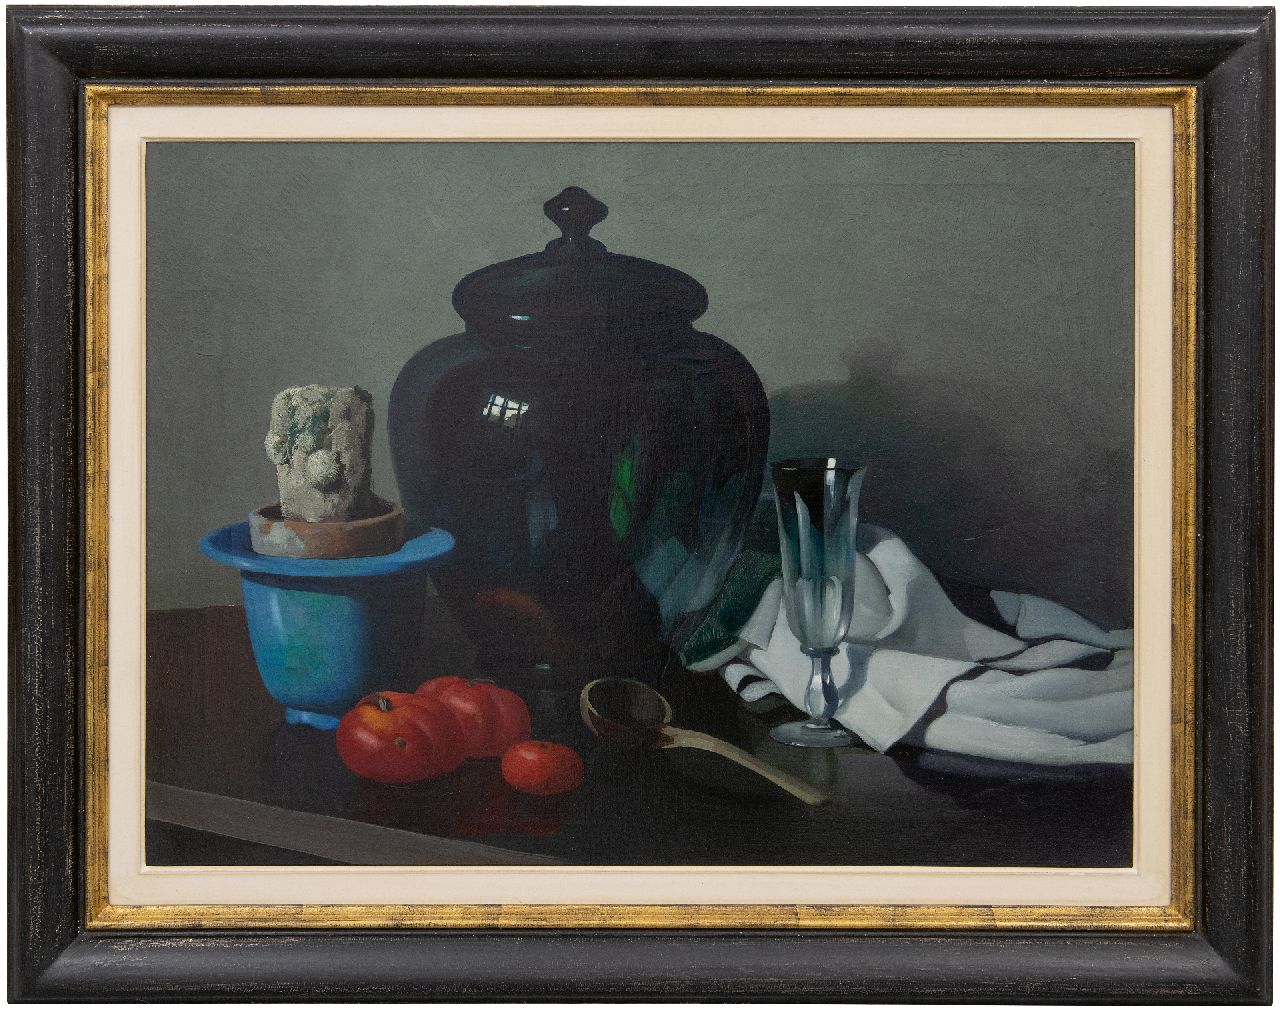 Hoff A.J. van 't | Adrianus Johannes 'Adriaan' van 't Hoff | Paintings offered for sale | Still life with cactus in a pot, a glass bowl and tomatoes, oil on canvas 56.7 x 75.8 cm